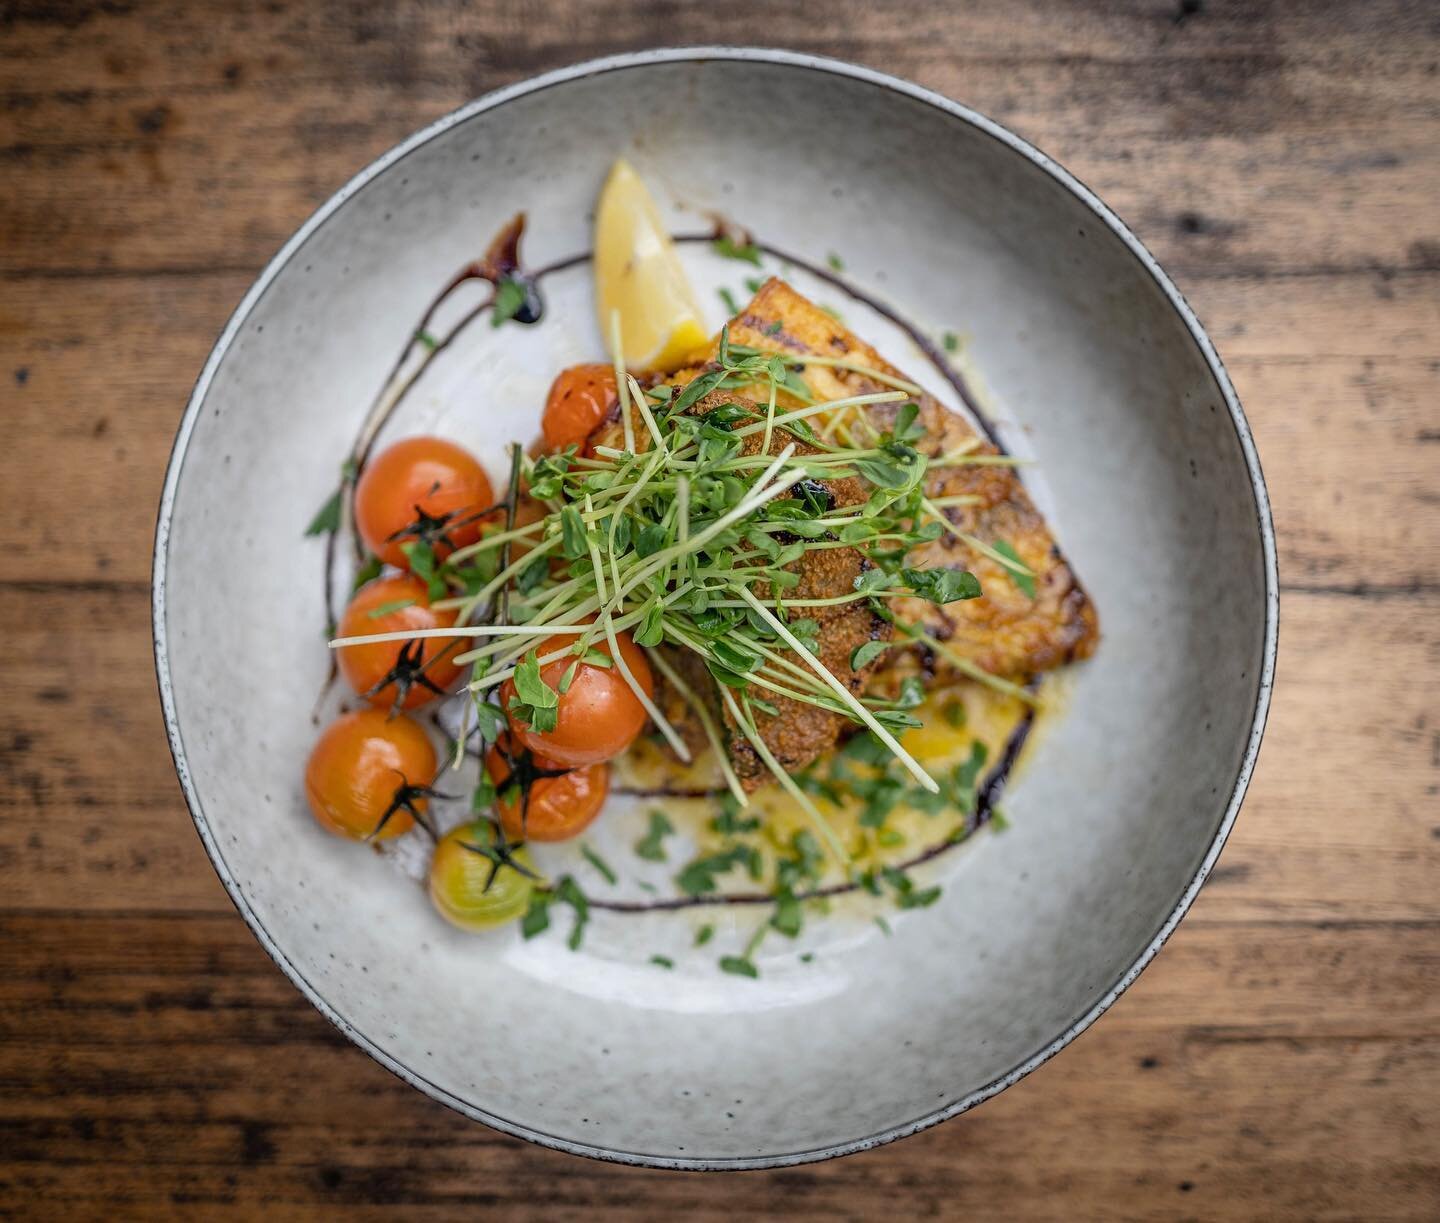 Cajun Spiced Barramundi 😍

Check out our new June specials next time you&rsquo;re at the Hahndorf Inn!

&bull;
&bull;
&bull;
&bull; 

#hahndorfinn #adelaide #tourismadelaide #germanbeer #adelaidehills #restaurantaustralia #germanfood #apfelstrudel #